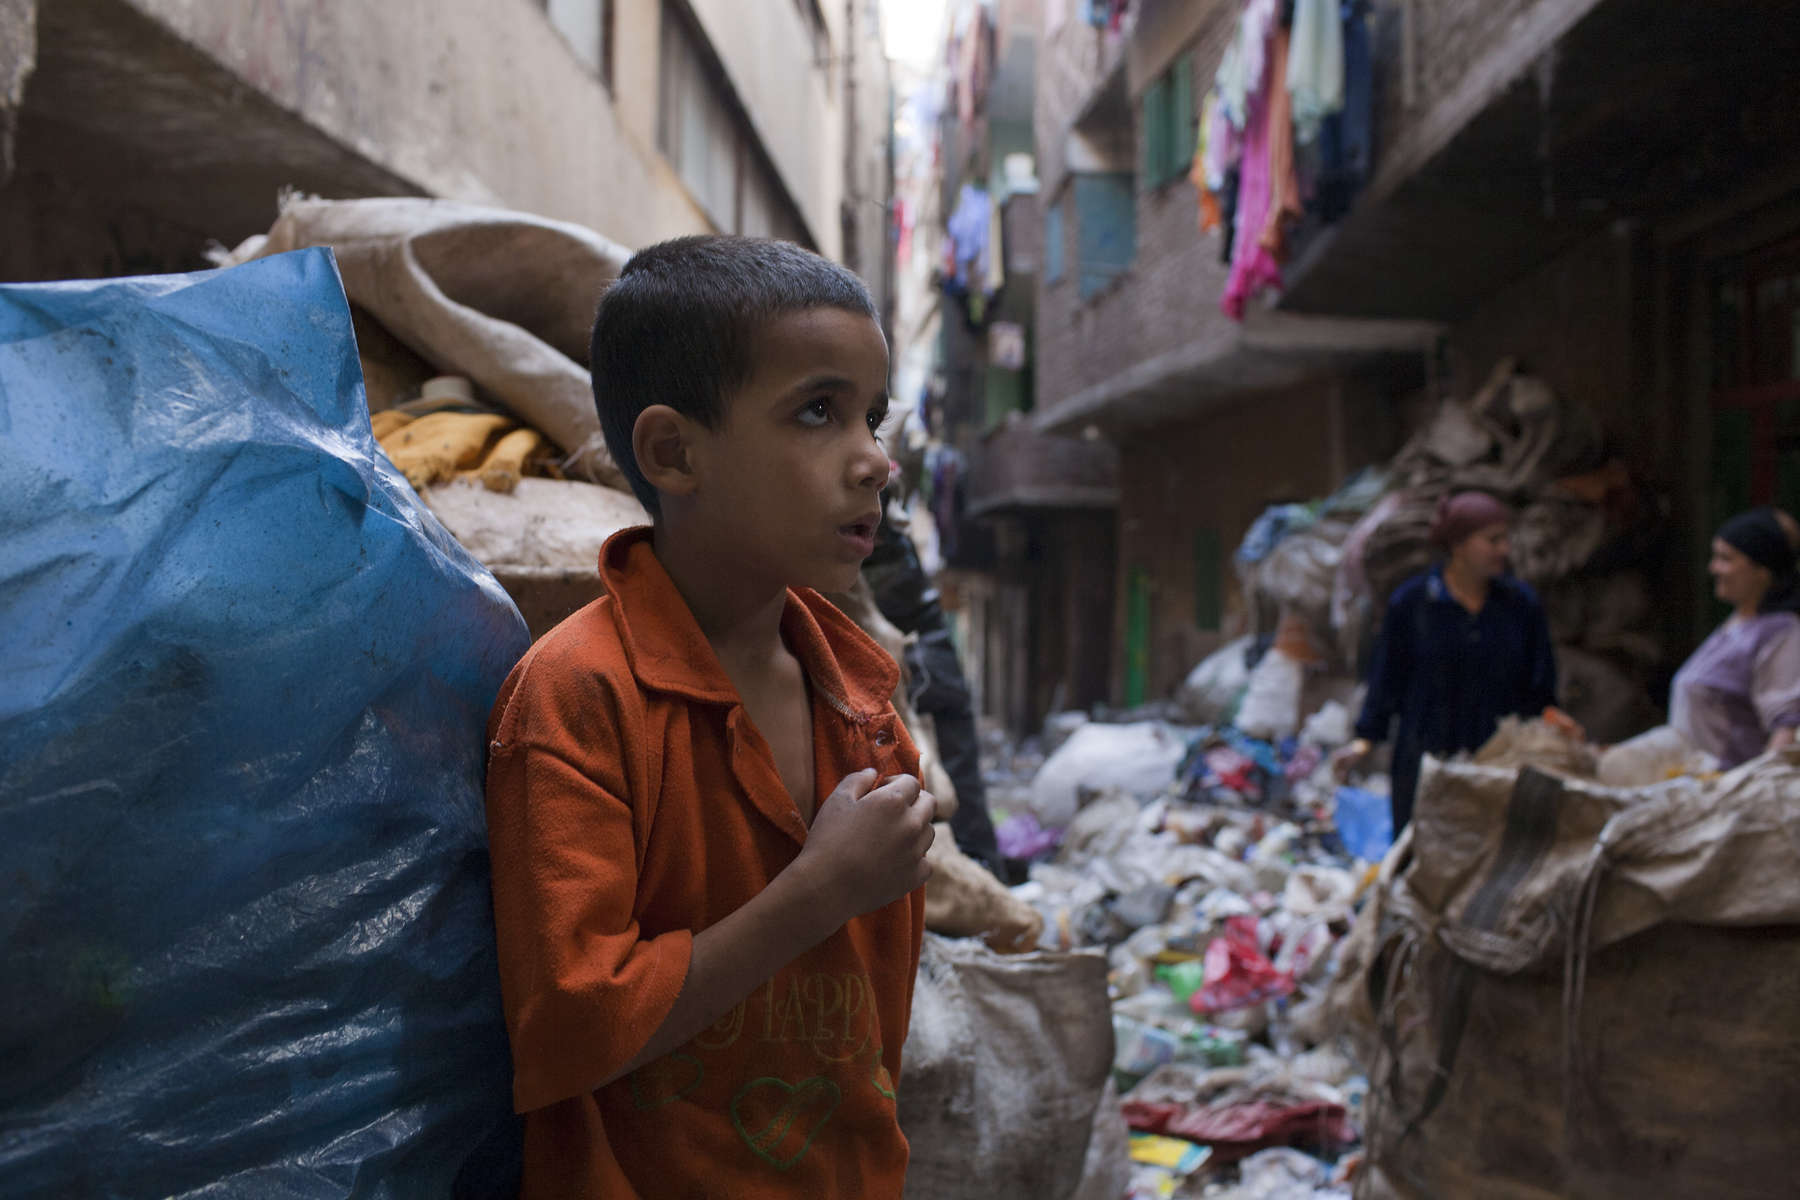 A young Zabaleen boy in a street strewn with garbage for recycling.Moqqatam is a suburb on the edge of Cairo and home to a people known as the Zabaleen, said to be the world’s greatest waste recyclers. The Zabaleen, which means plainly enough, “the garbage collectors”, pick up around 4,000 tons of Cairo’s waste each day. American researchers have shown that the Zabaleen recycle 85% of this garbage into something useful: a higher rate than anywhere else on the planet. The men do two shifts leaving about 4am and again around 9am. The rubbish is taken back to Moqqatam for the women to sit in and sort through. The organic waste is fed to livestock (the Zabaleen are originally swine herders), the rest sorted for recycling. The future of the Zabaleen is uncertain: if the Cairo authorities get their way, this community of around 25,000 Coptic Christians living in a Muslim country will be gone, and with it, their unique lifestyle.